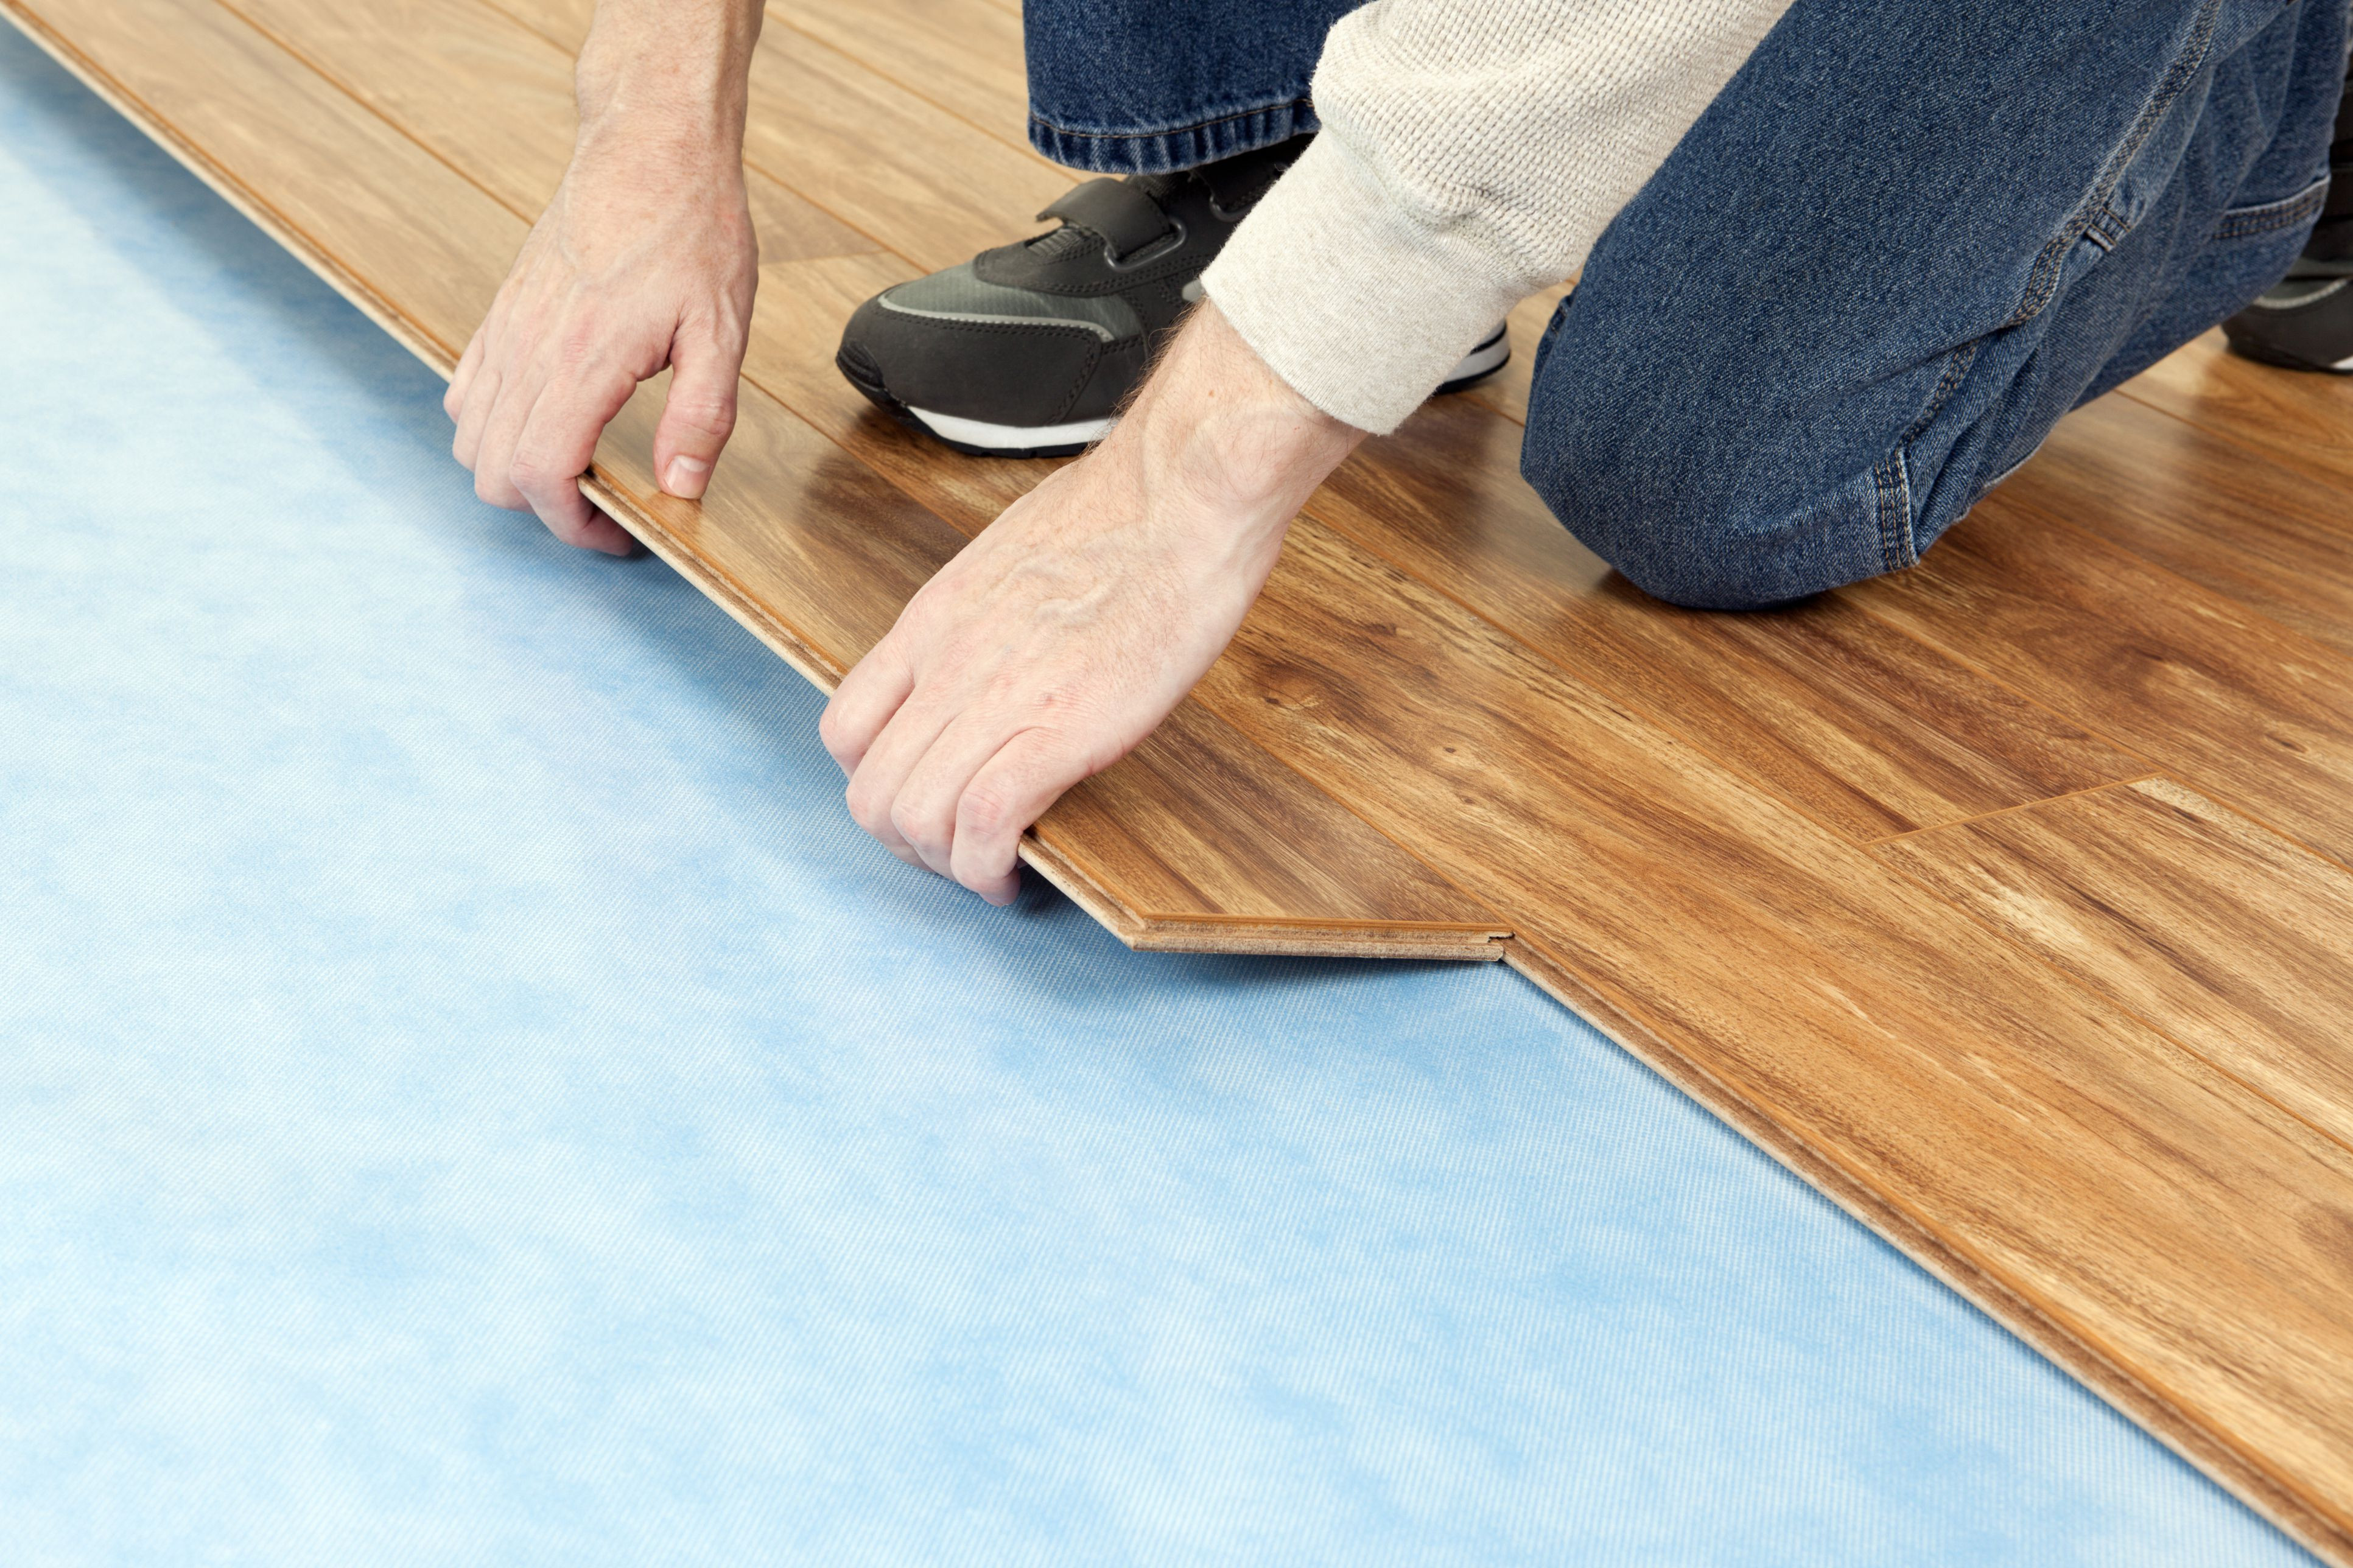 10 Popular How to Install Engineered Hardwood Floors Yourself 2024 free download how to install engineered hardwood floors yourself of flooring underlayment the basics within new floor installation 185270632 582b722c3df78c6f6af0a8ab